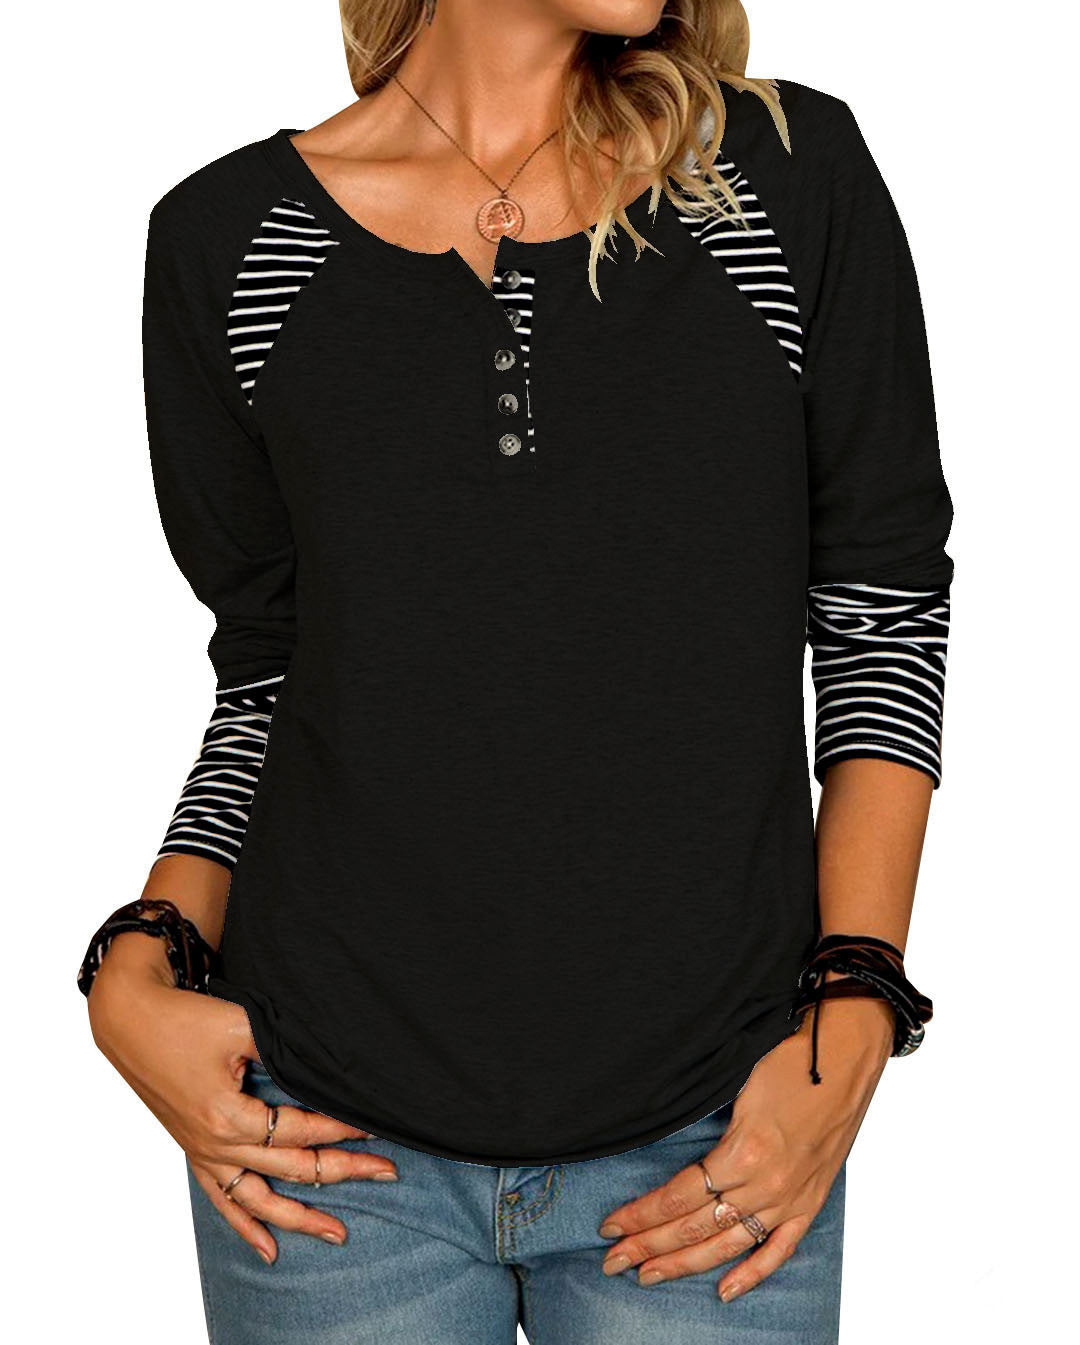 Women's Long-sleeved Printed Striped Casual T-shirt Blouses